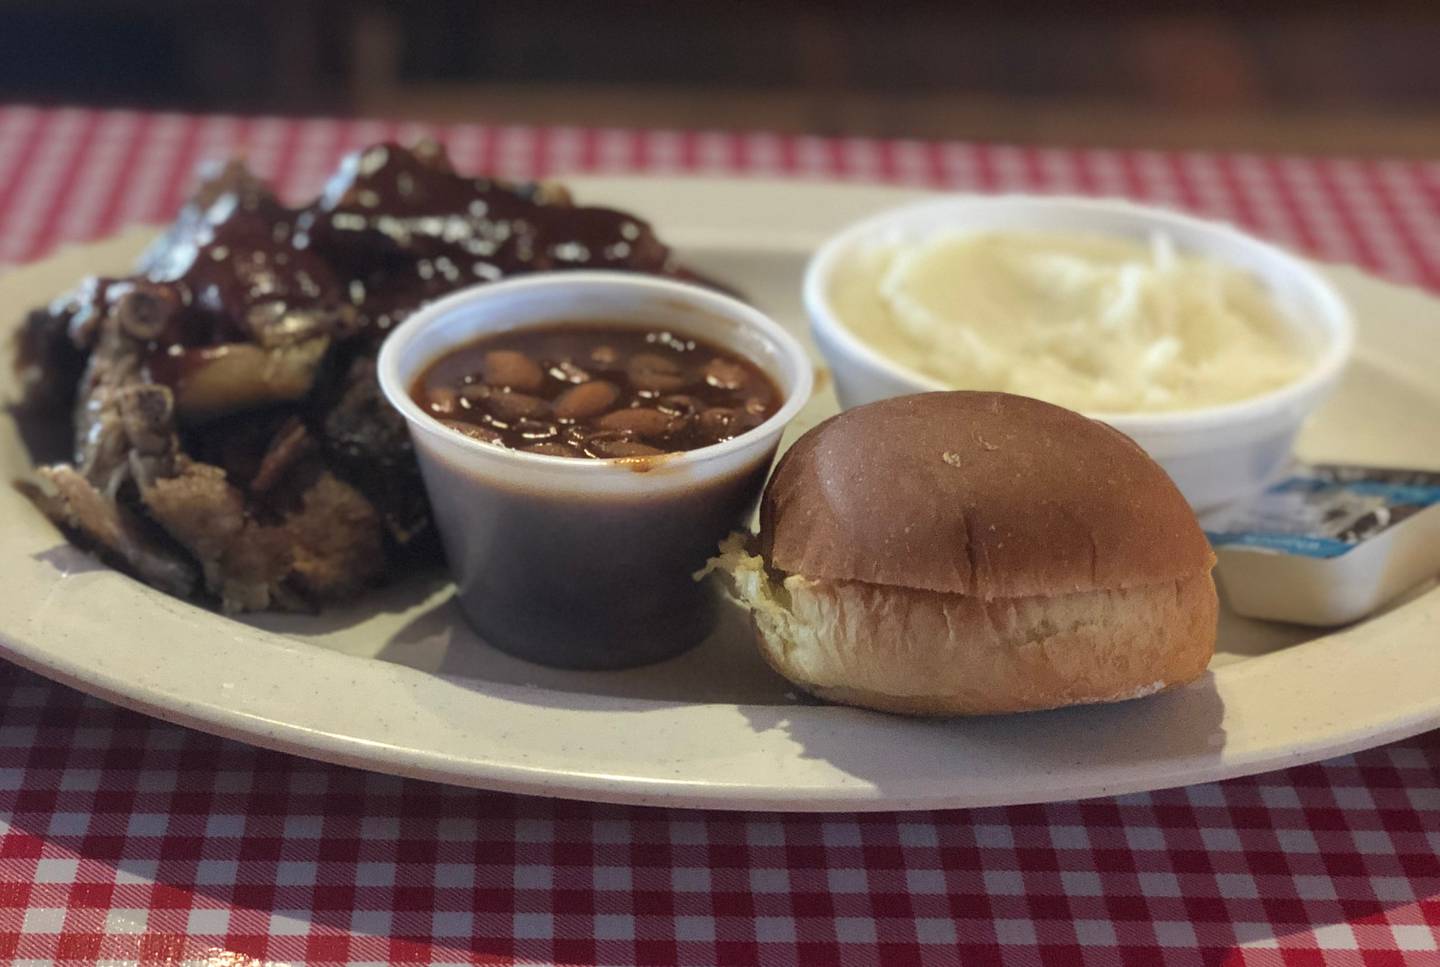 The Texan Barbeque rib tips fall off the bone and are complimented by the tangy sauce.